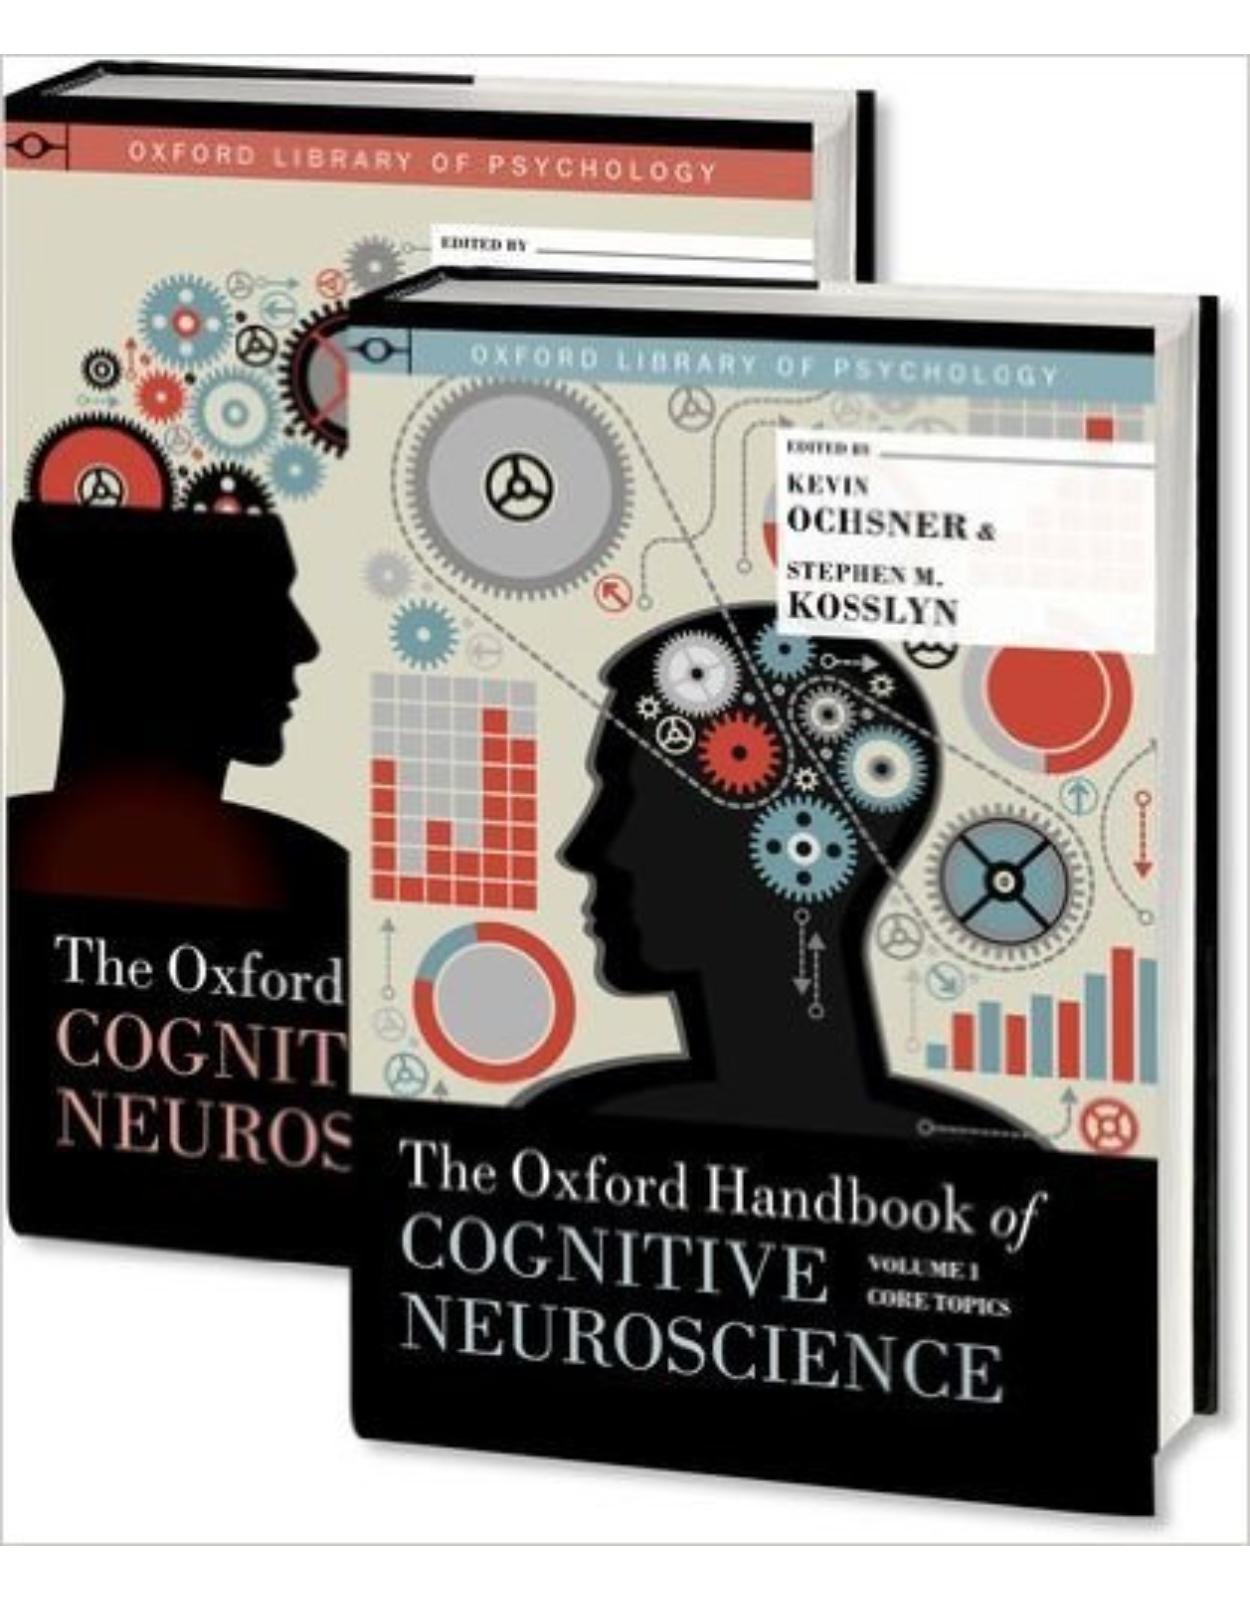 The Oxford Handbook of Cognitive Neuroscience, Two Volume Set (Oxford Library of Psychology) 1st Edition